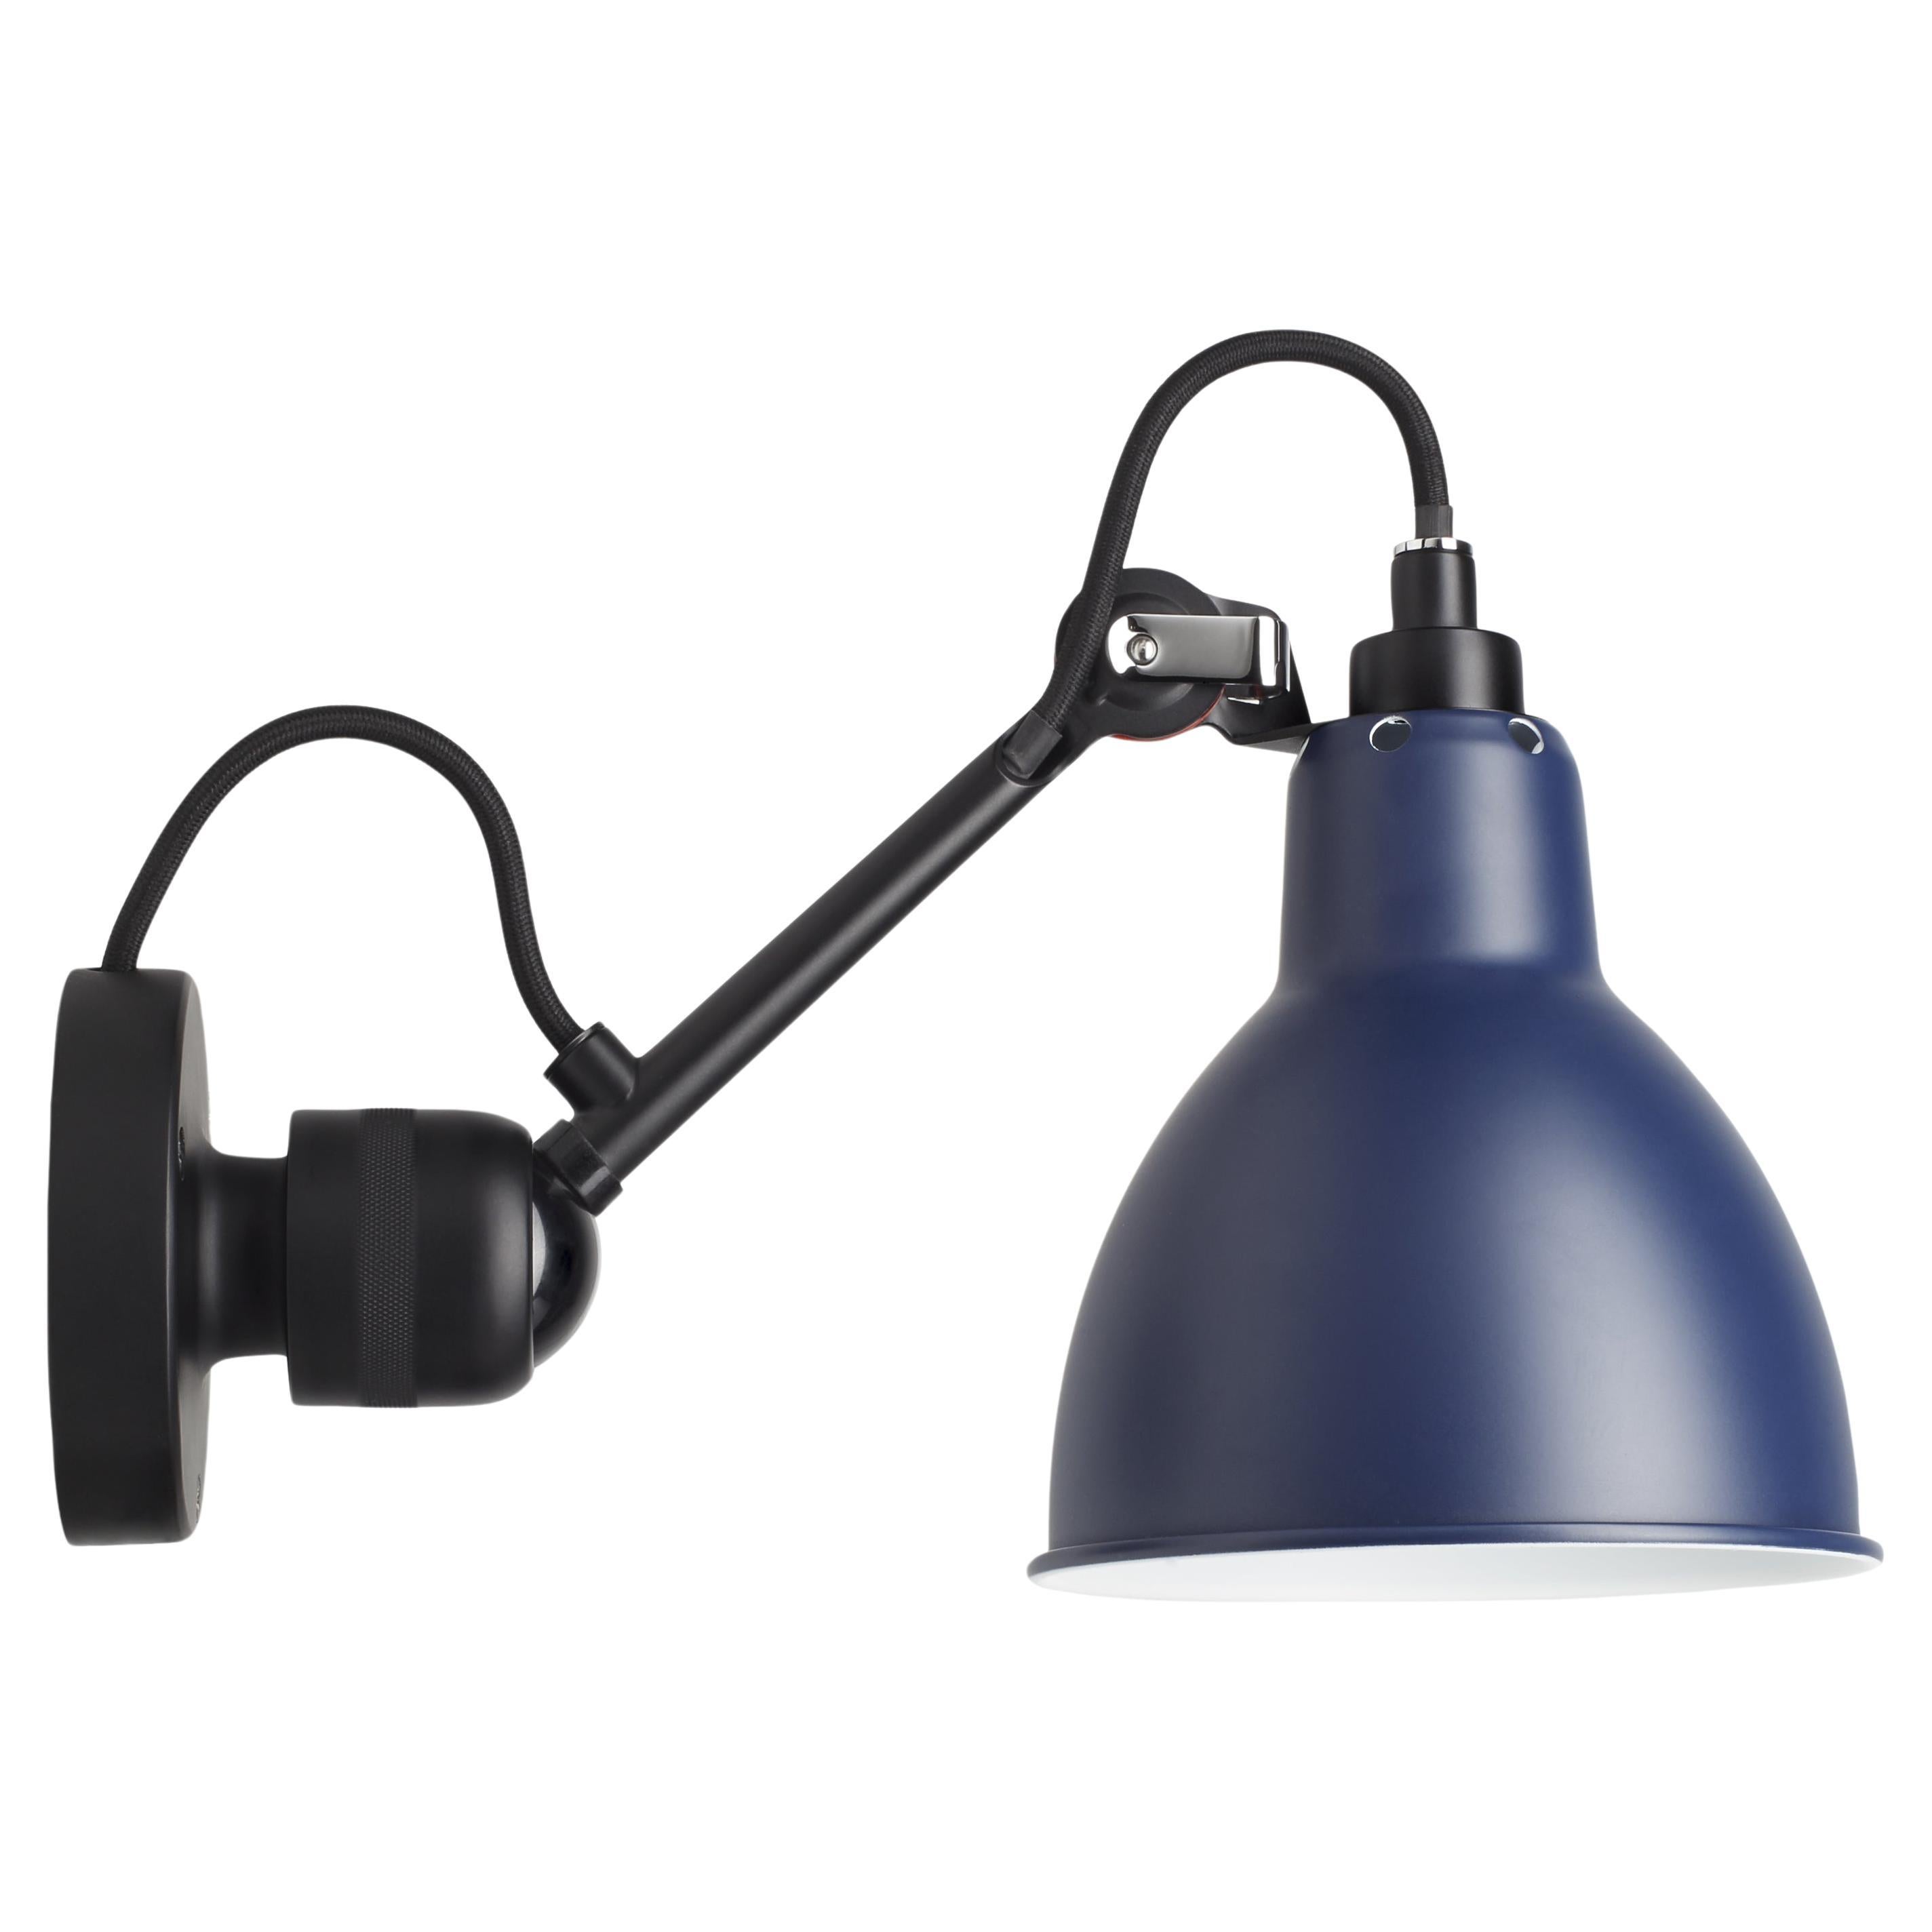 DCW Editions La Lampe Gras N°304 Wall Lamp in Black Arm and Blue Shade